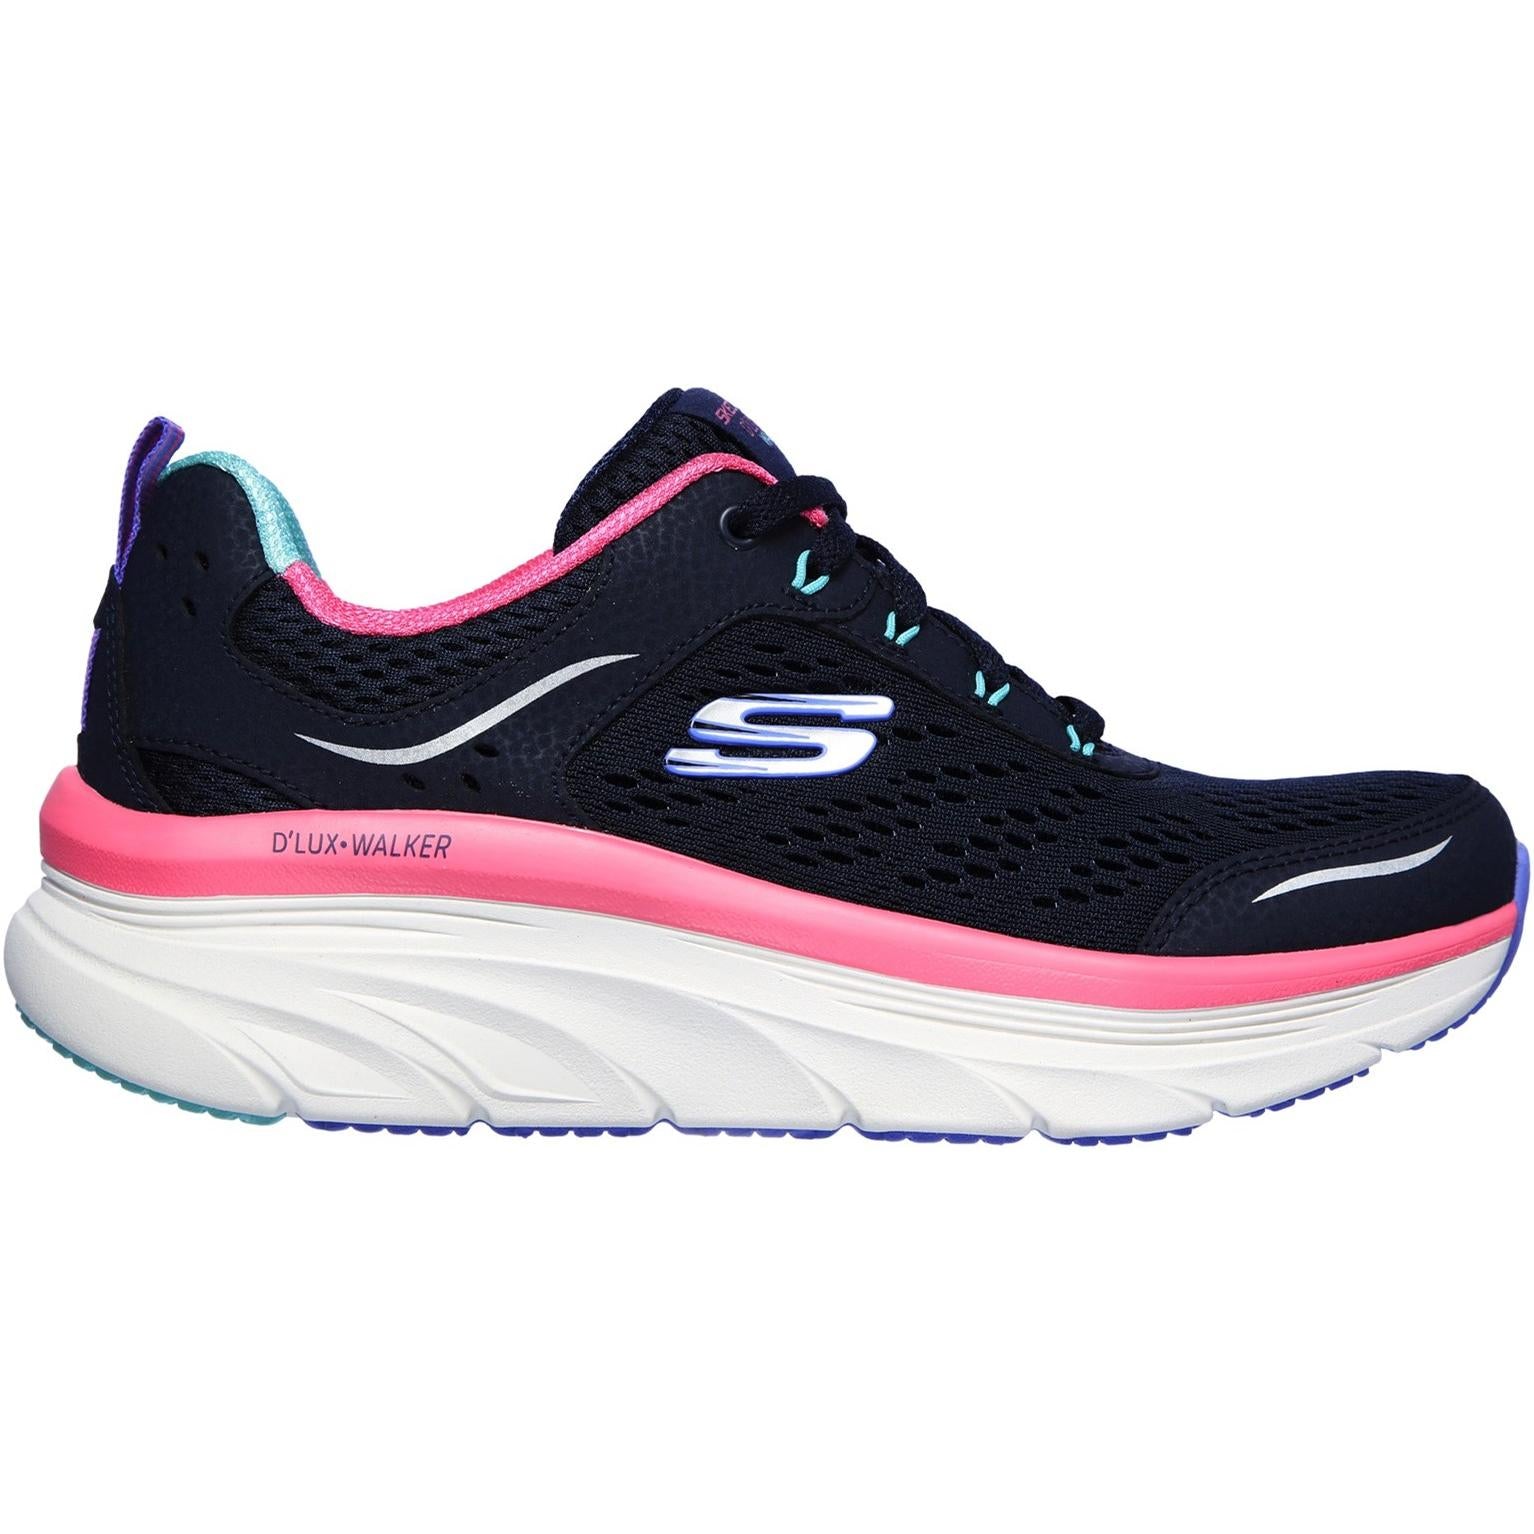 Skechers Relaxed Fit D'Lux Walker Infinite Motion Sports Trainers